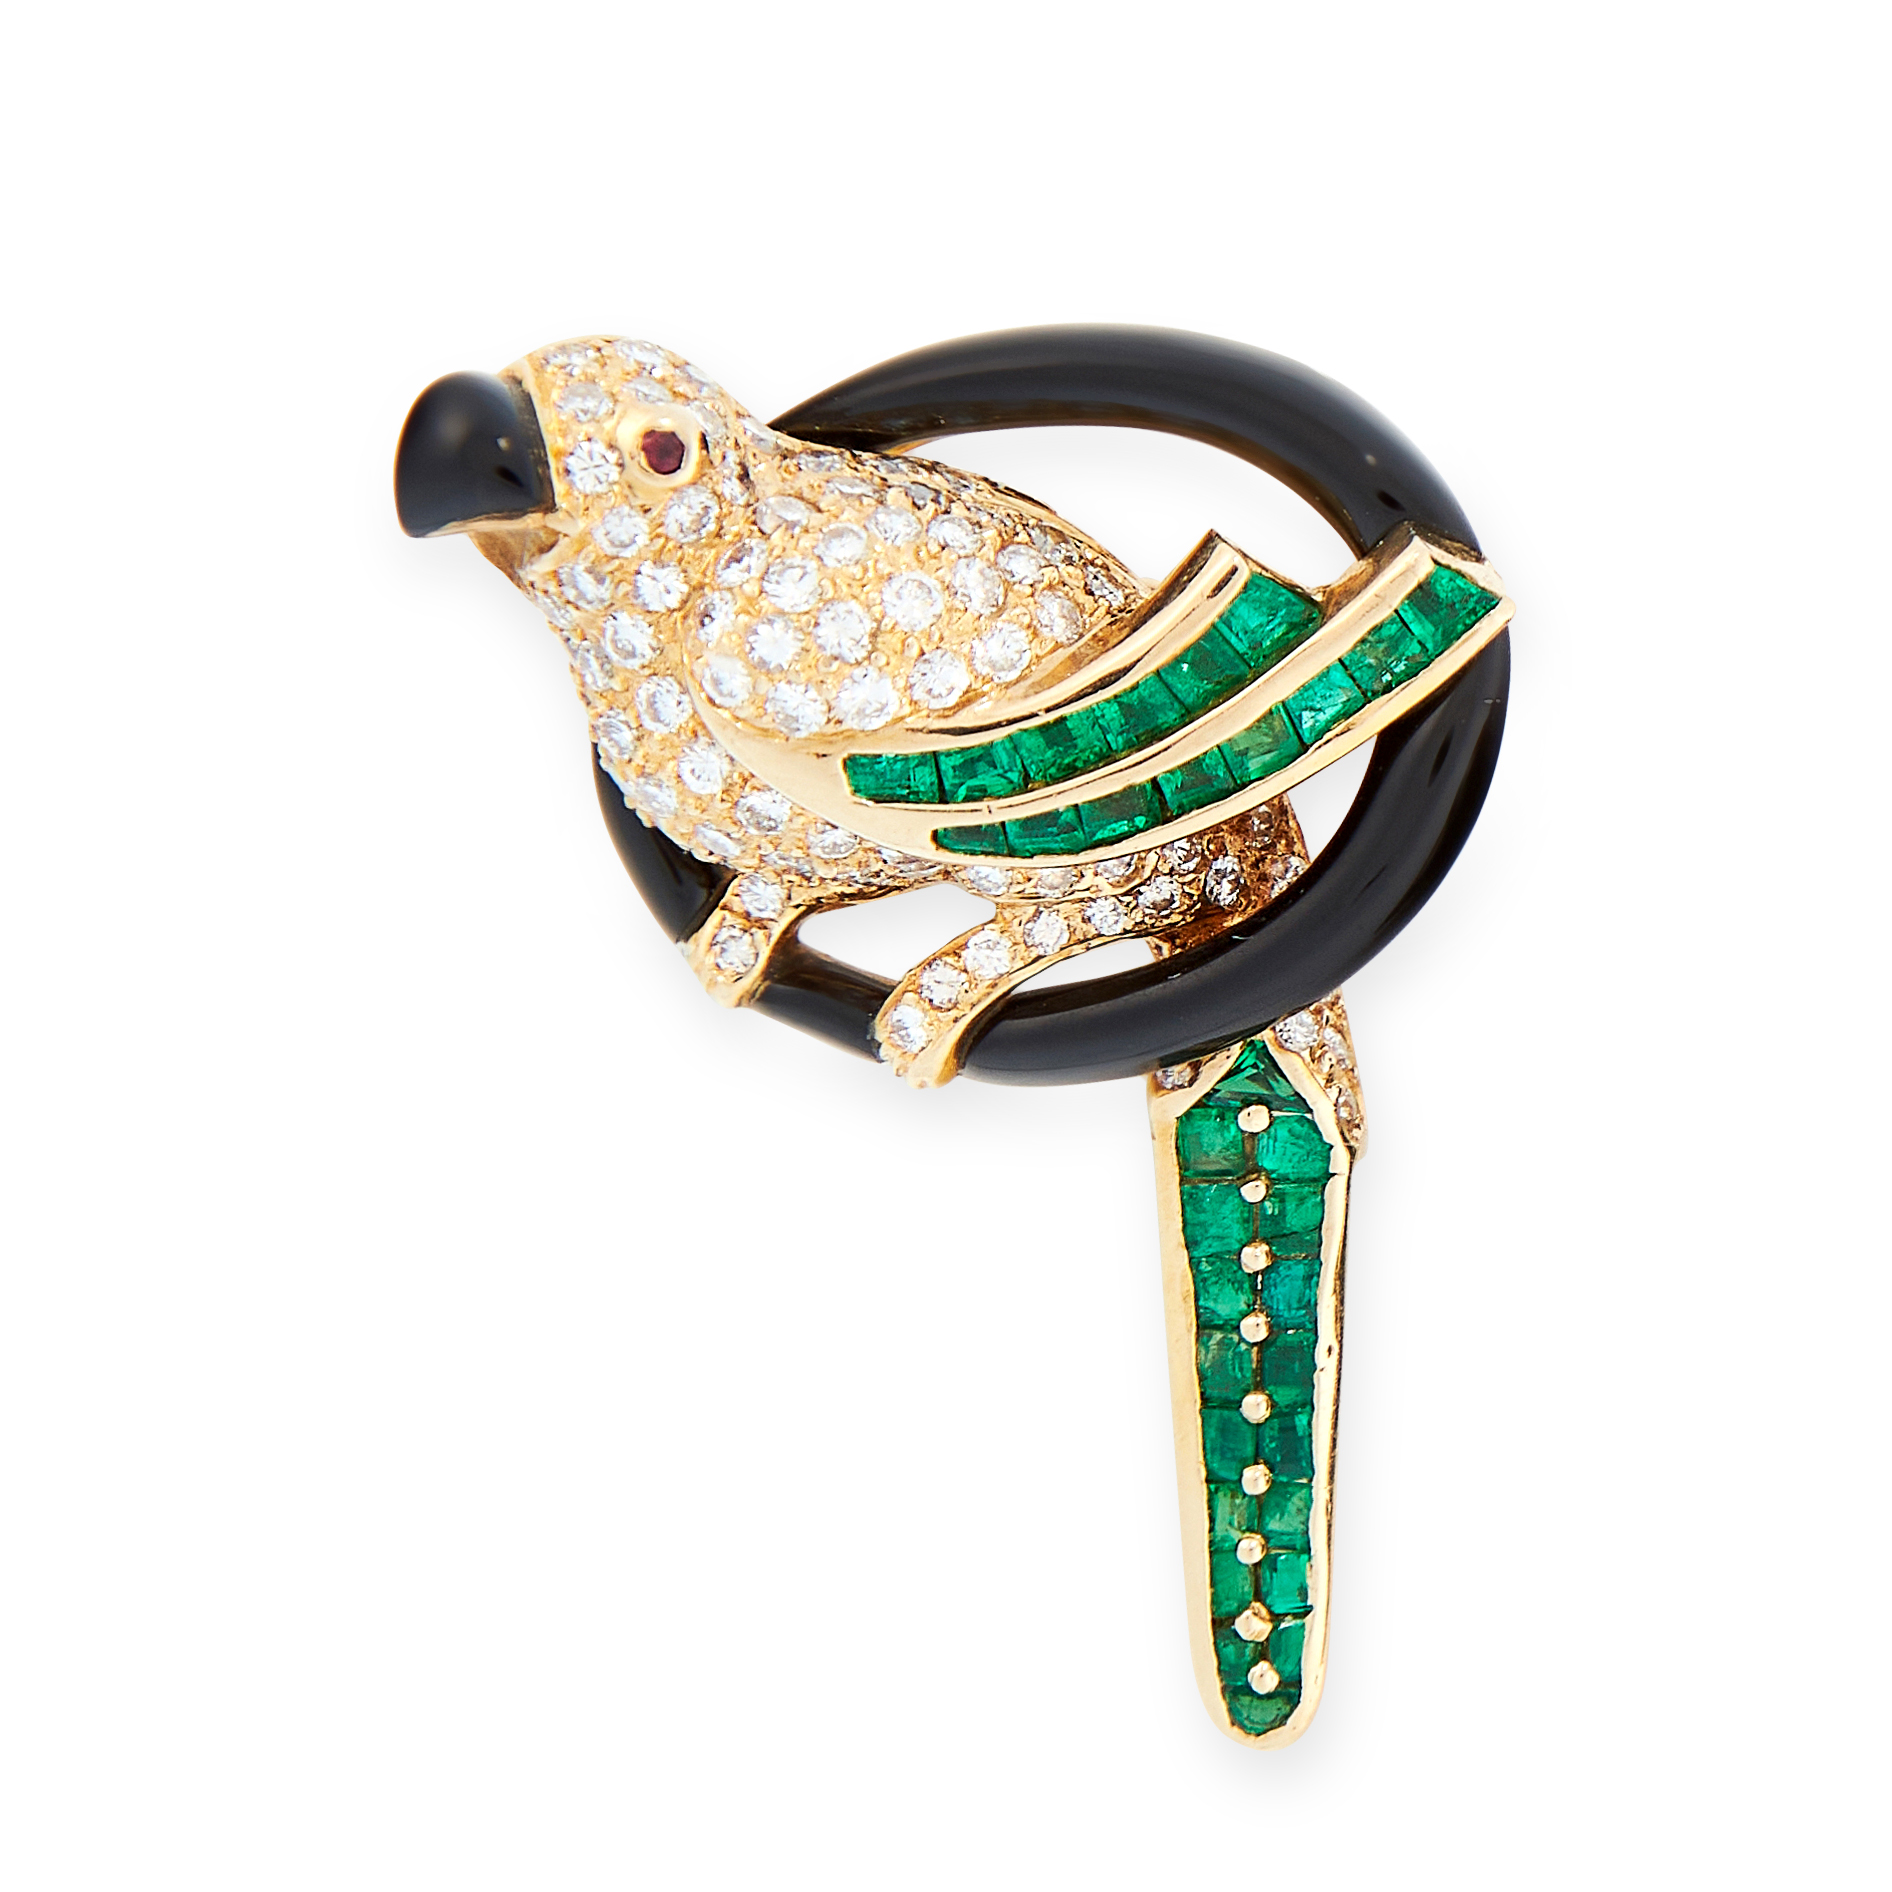 A VINTAGE EMERALD, DIAMOND, ONYX AND RUBY BROOCH, ARFAN PARIS in 18ct yellow gold, designed as a